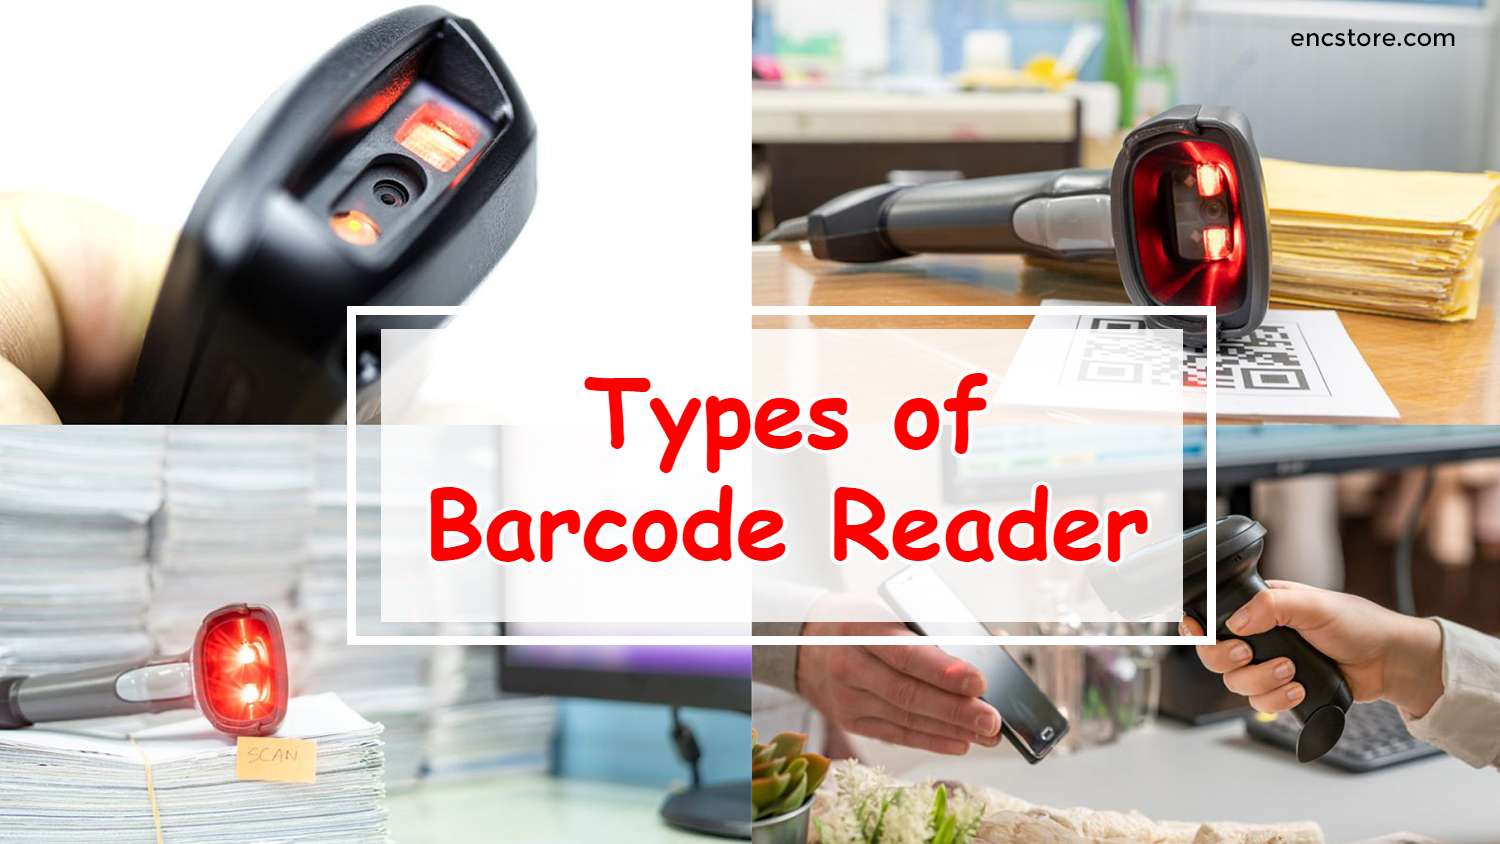 Types of Barcode Reader